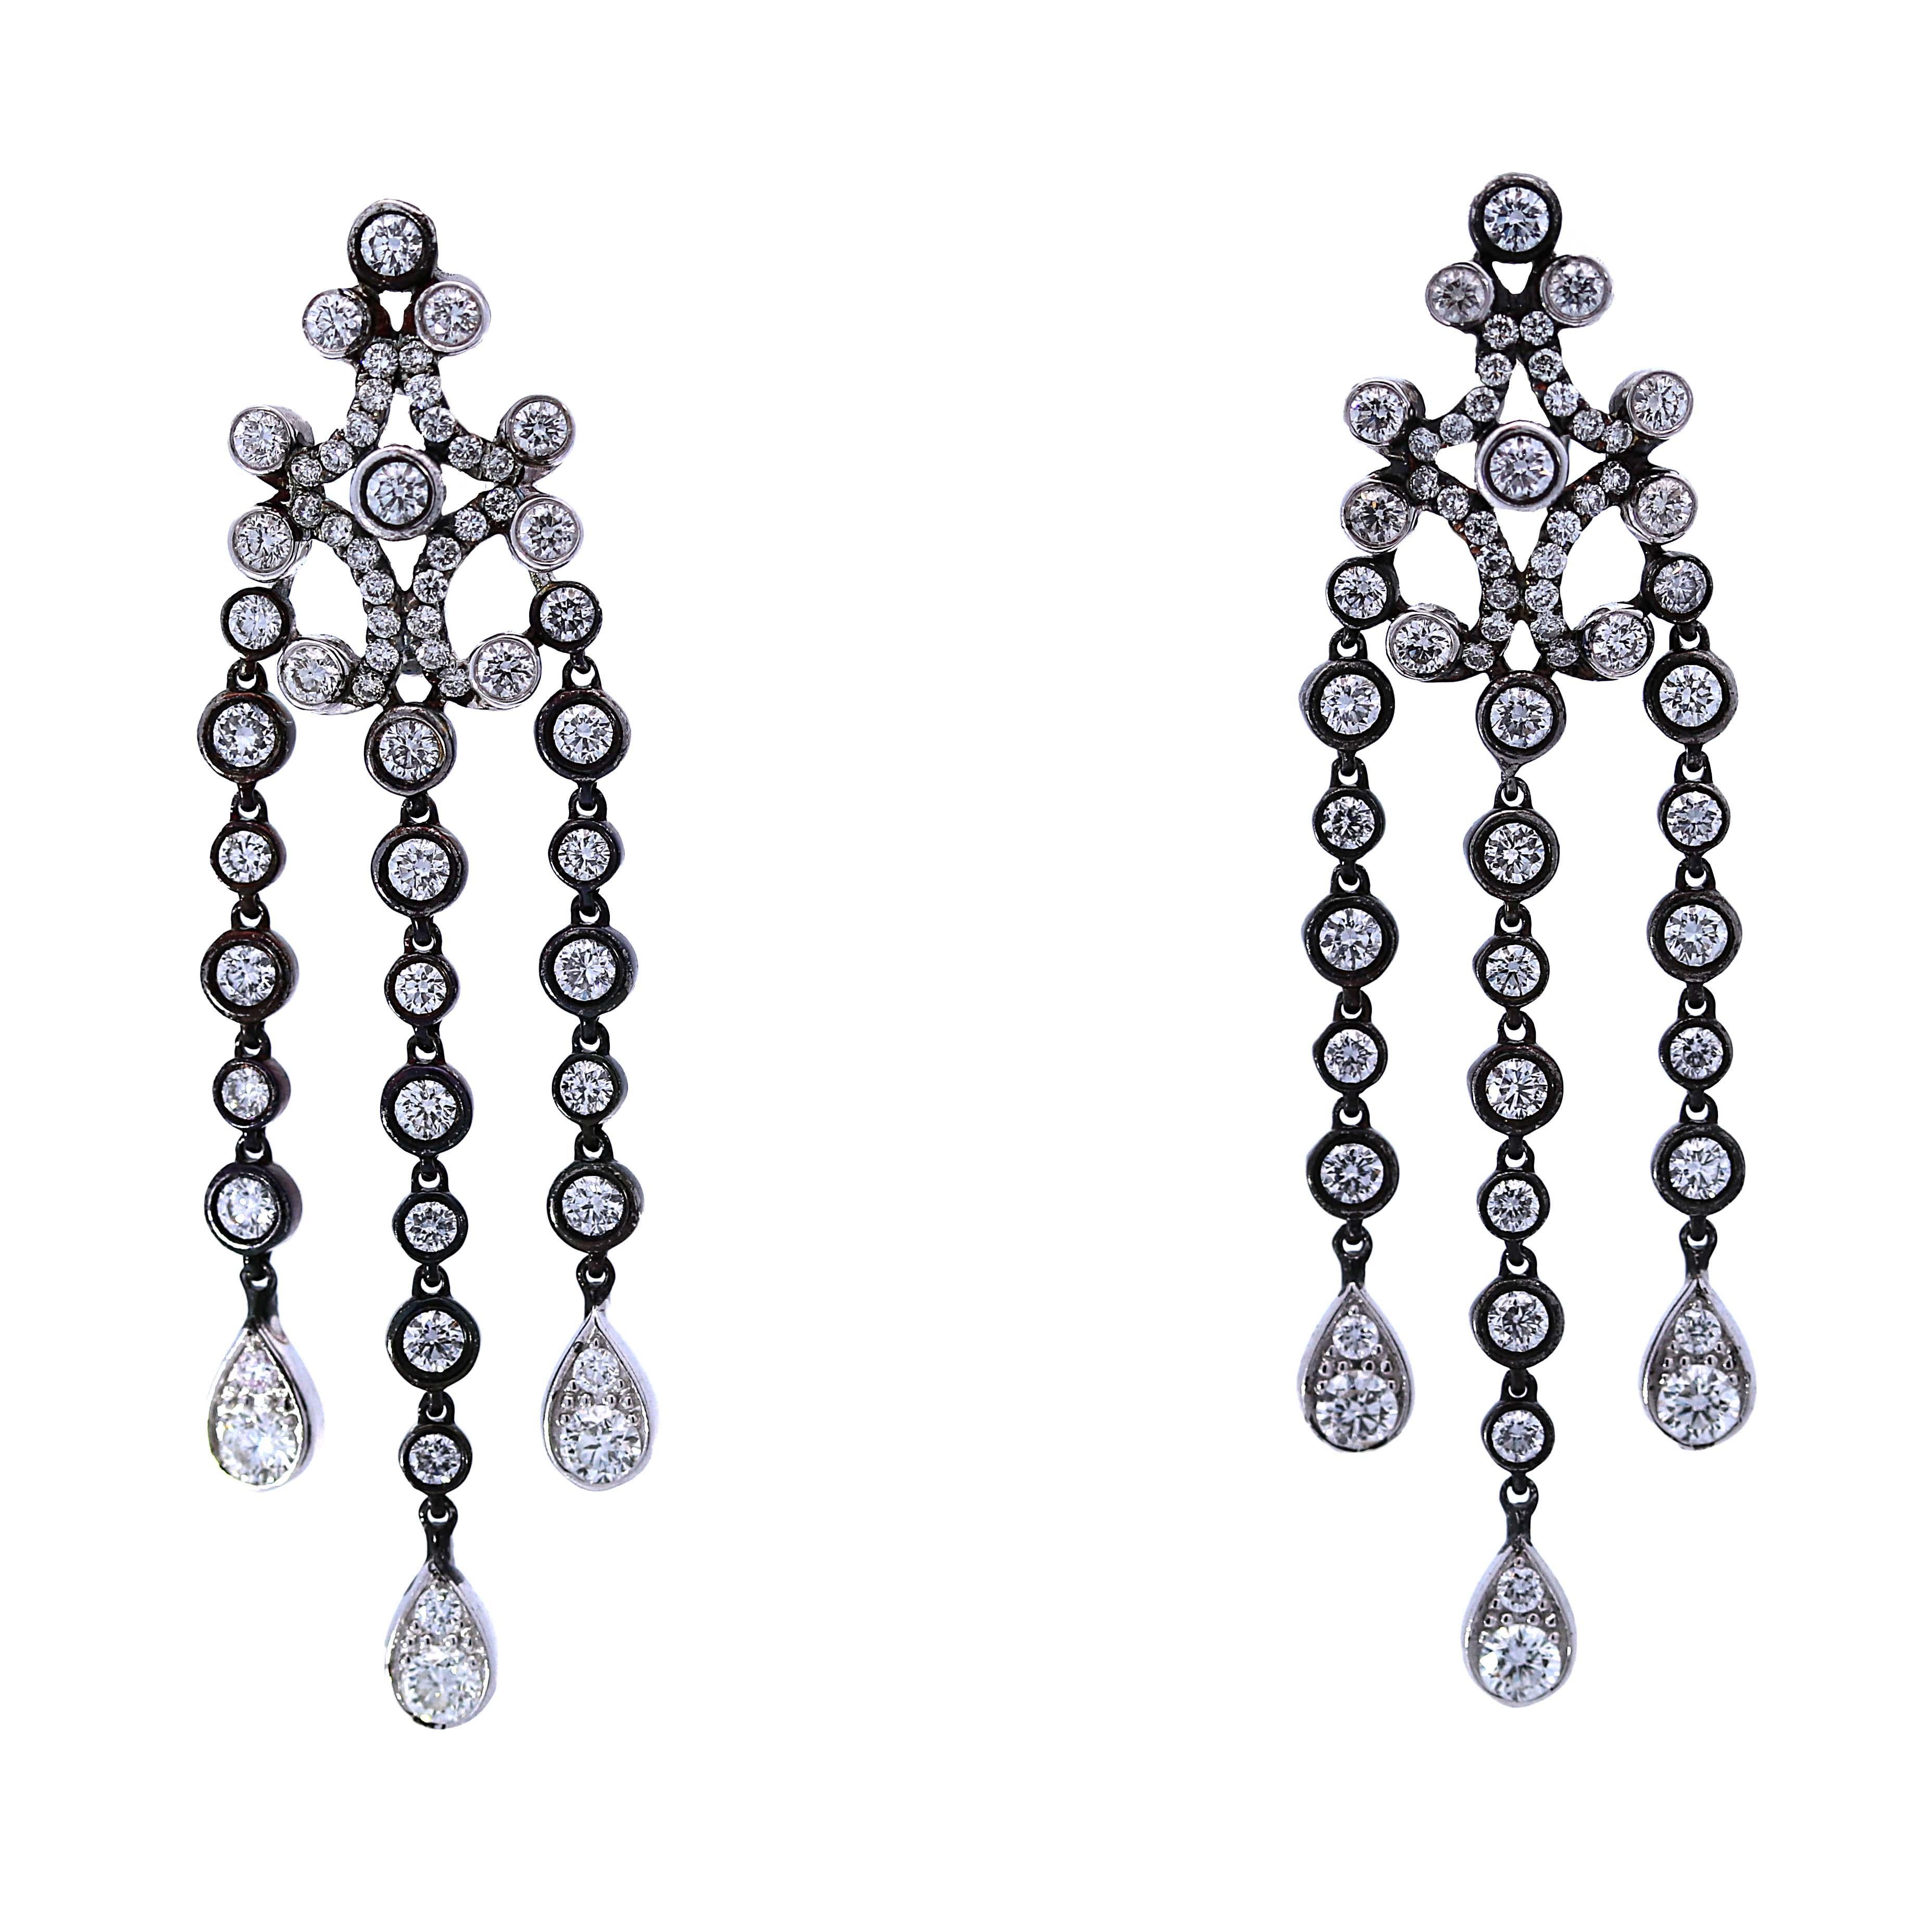 Belle Époque inspired diamond dangle drop chandelier earrings. Crafted with precision and adorned with a mesmerizing cascade of diamonds totaling 3.01 carats, each earring embodies sophistication and allure. Set in luxurious 14-karat white gold with